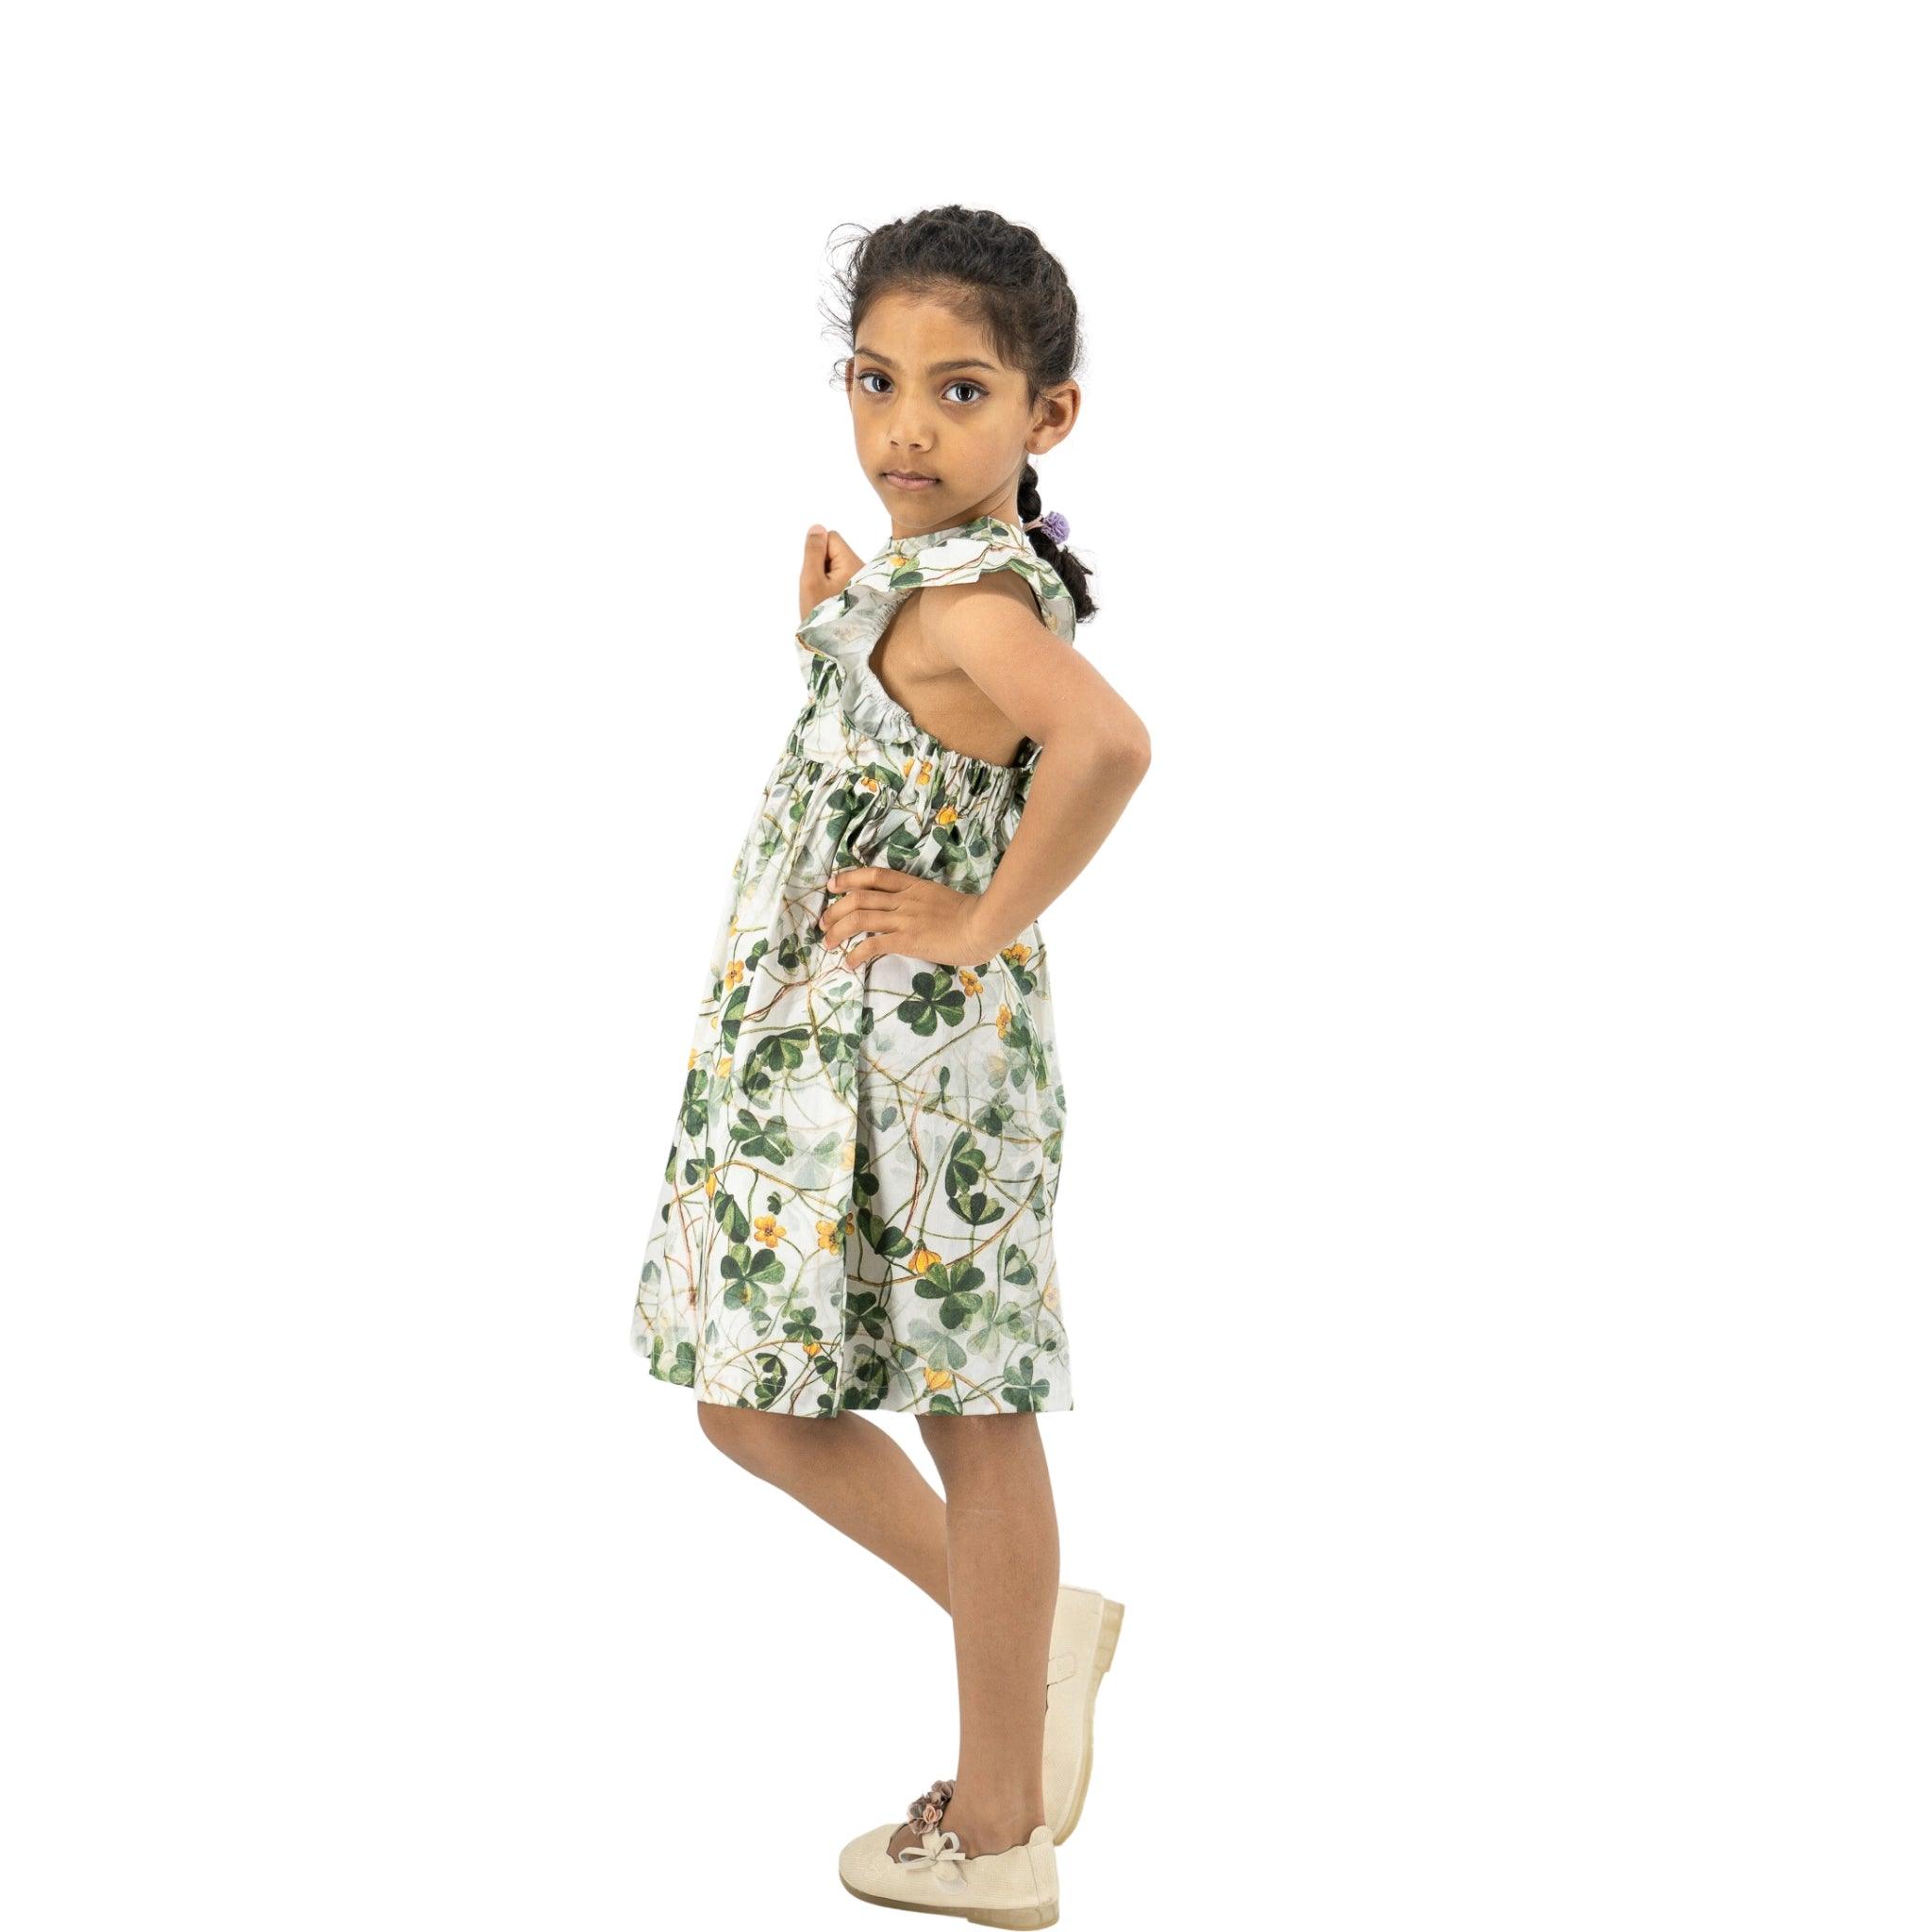 Young girl posing in a Karee green floral cotton dress for girls and white shoes, standing sideways with a confident gaze, isolated on a white background.